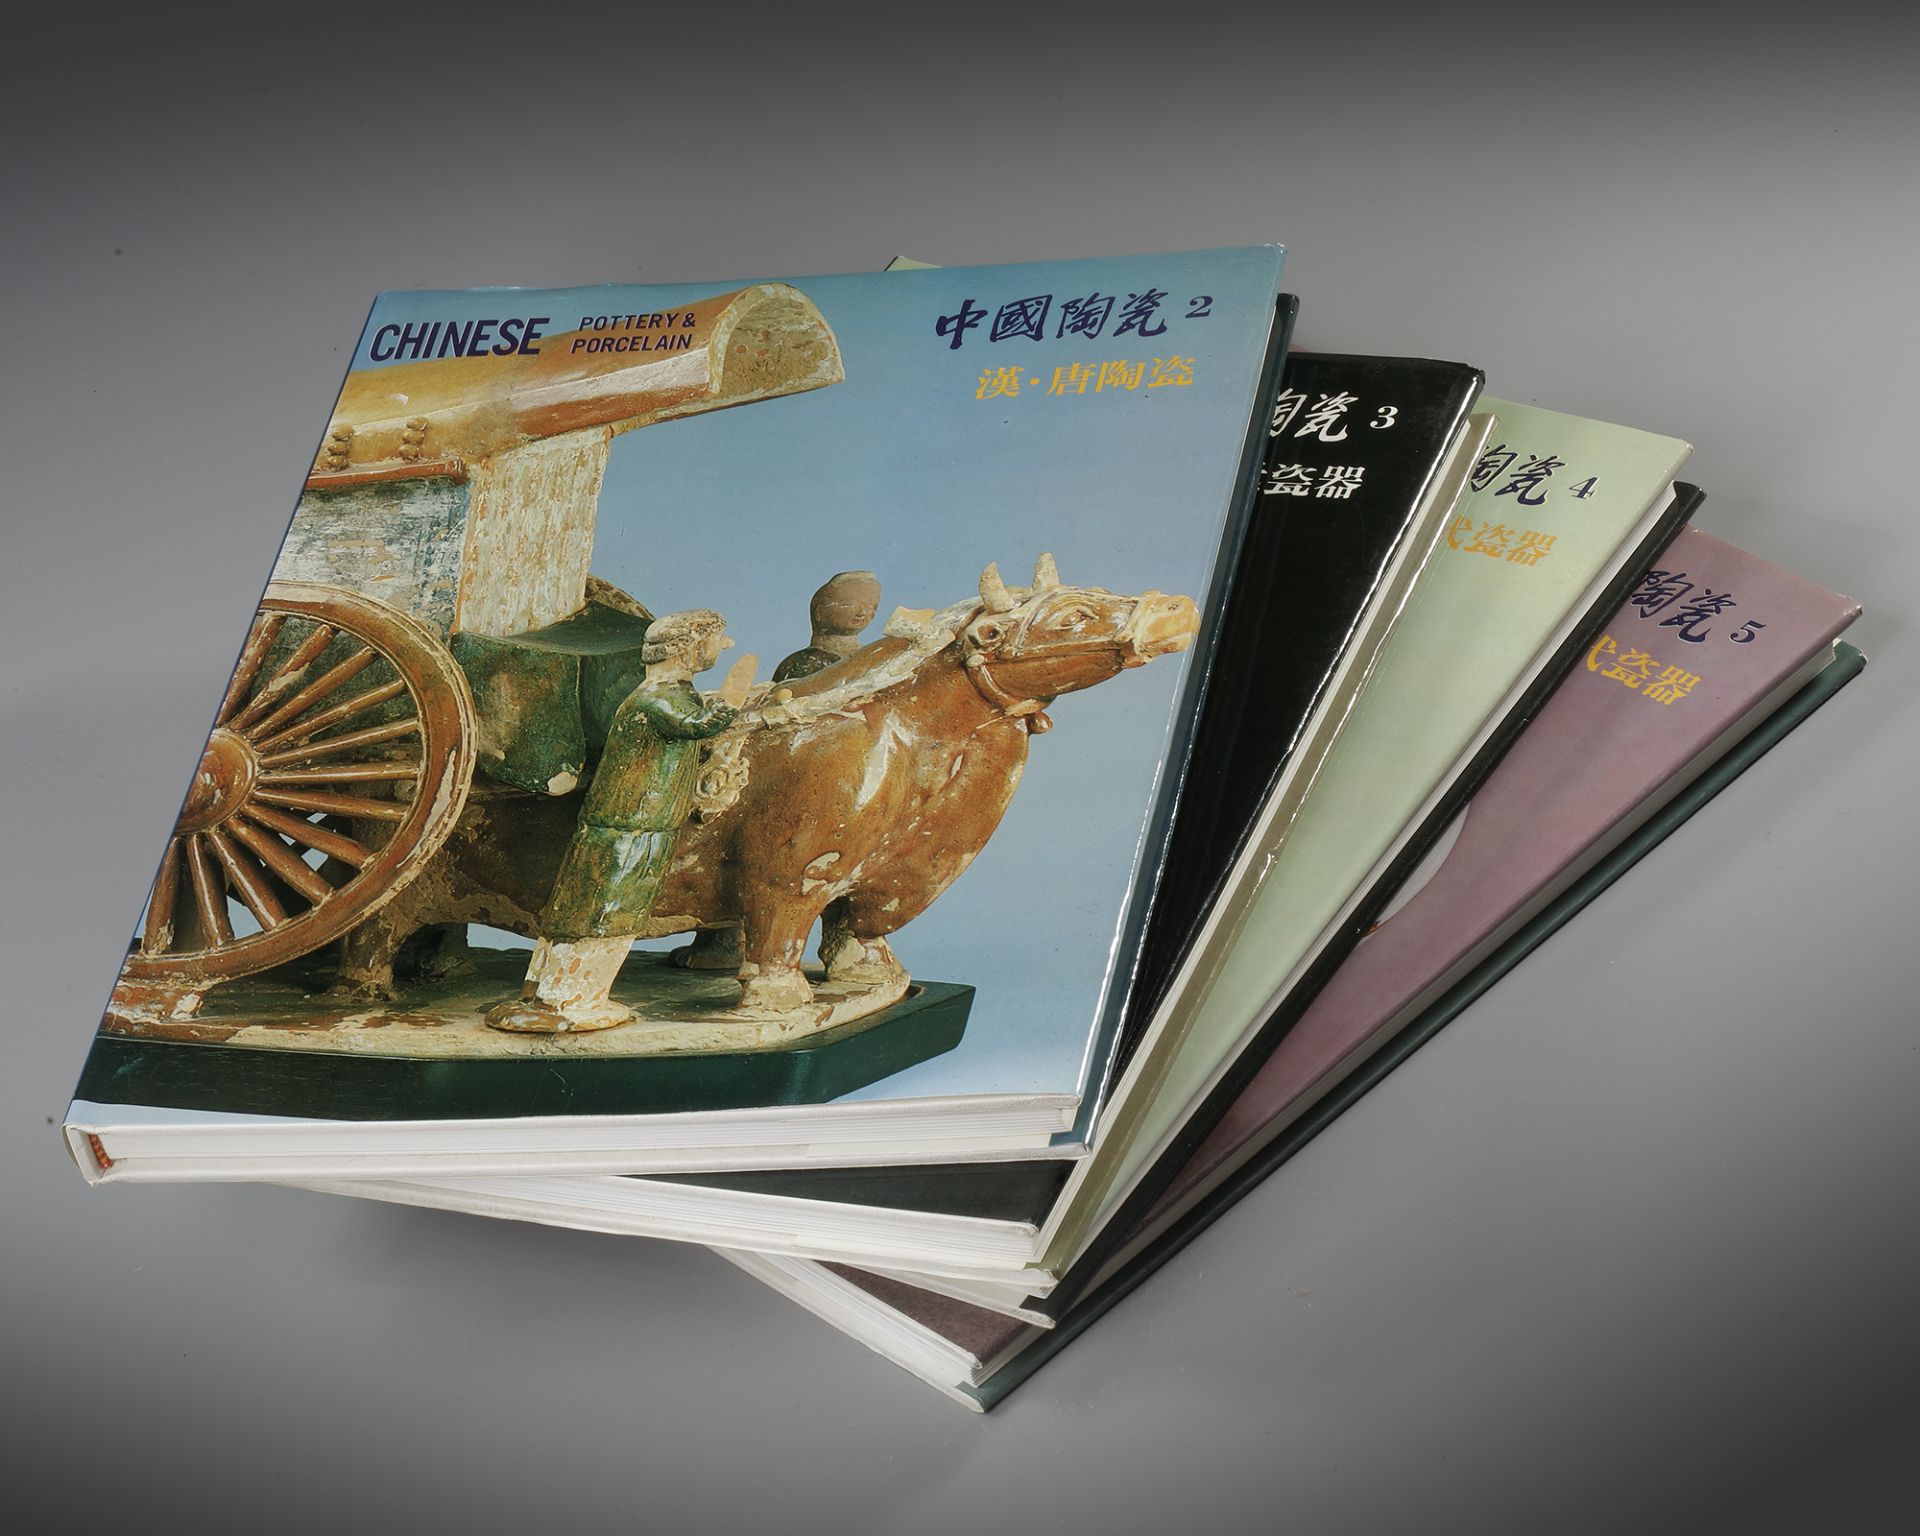 CHINESE POTTERY AND PORCELAIN - 4 VOLUMES 1980 - Image 3 of 3